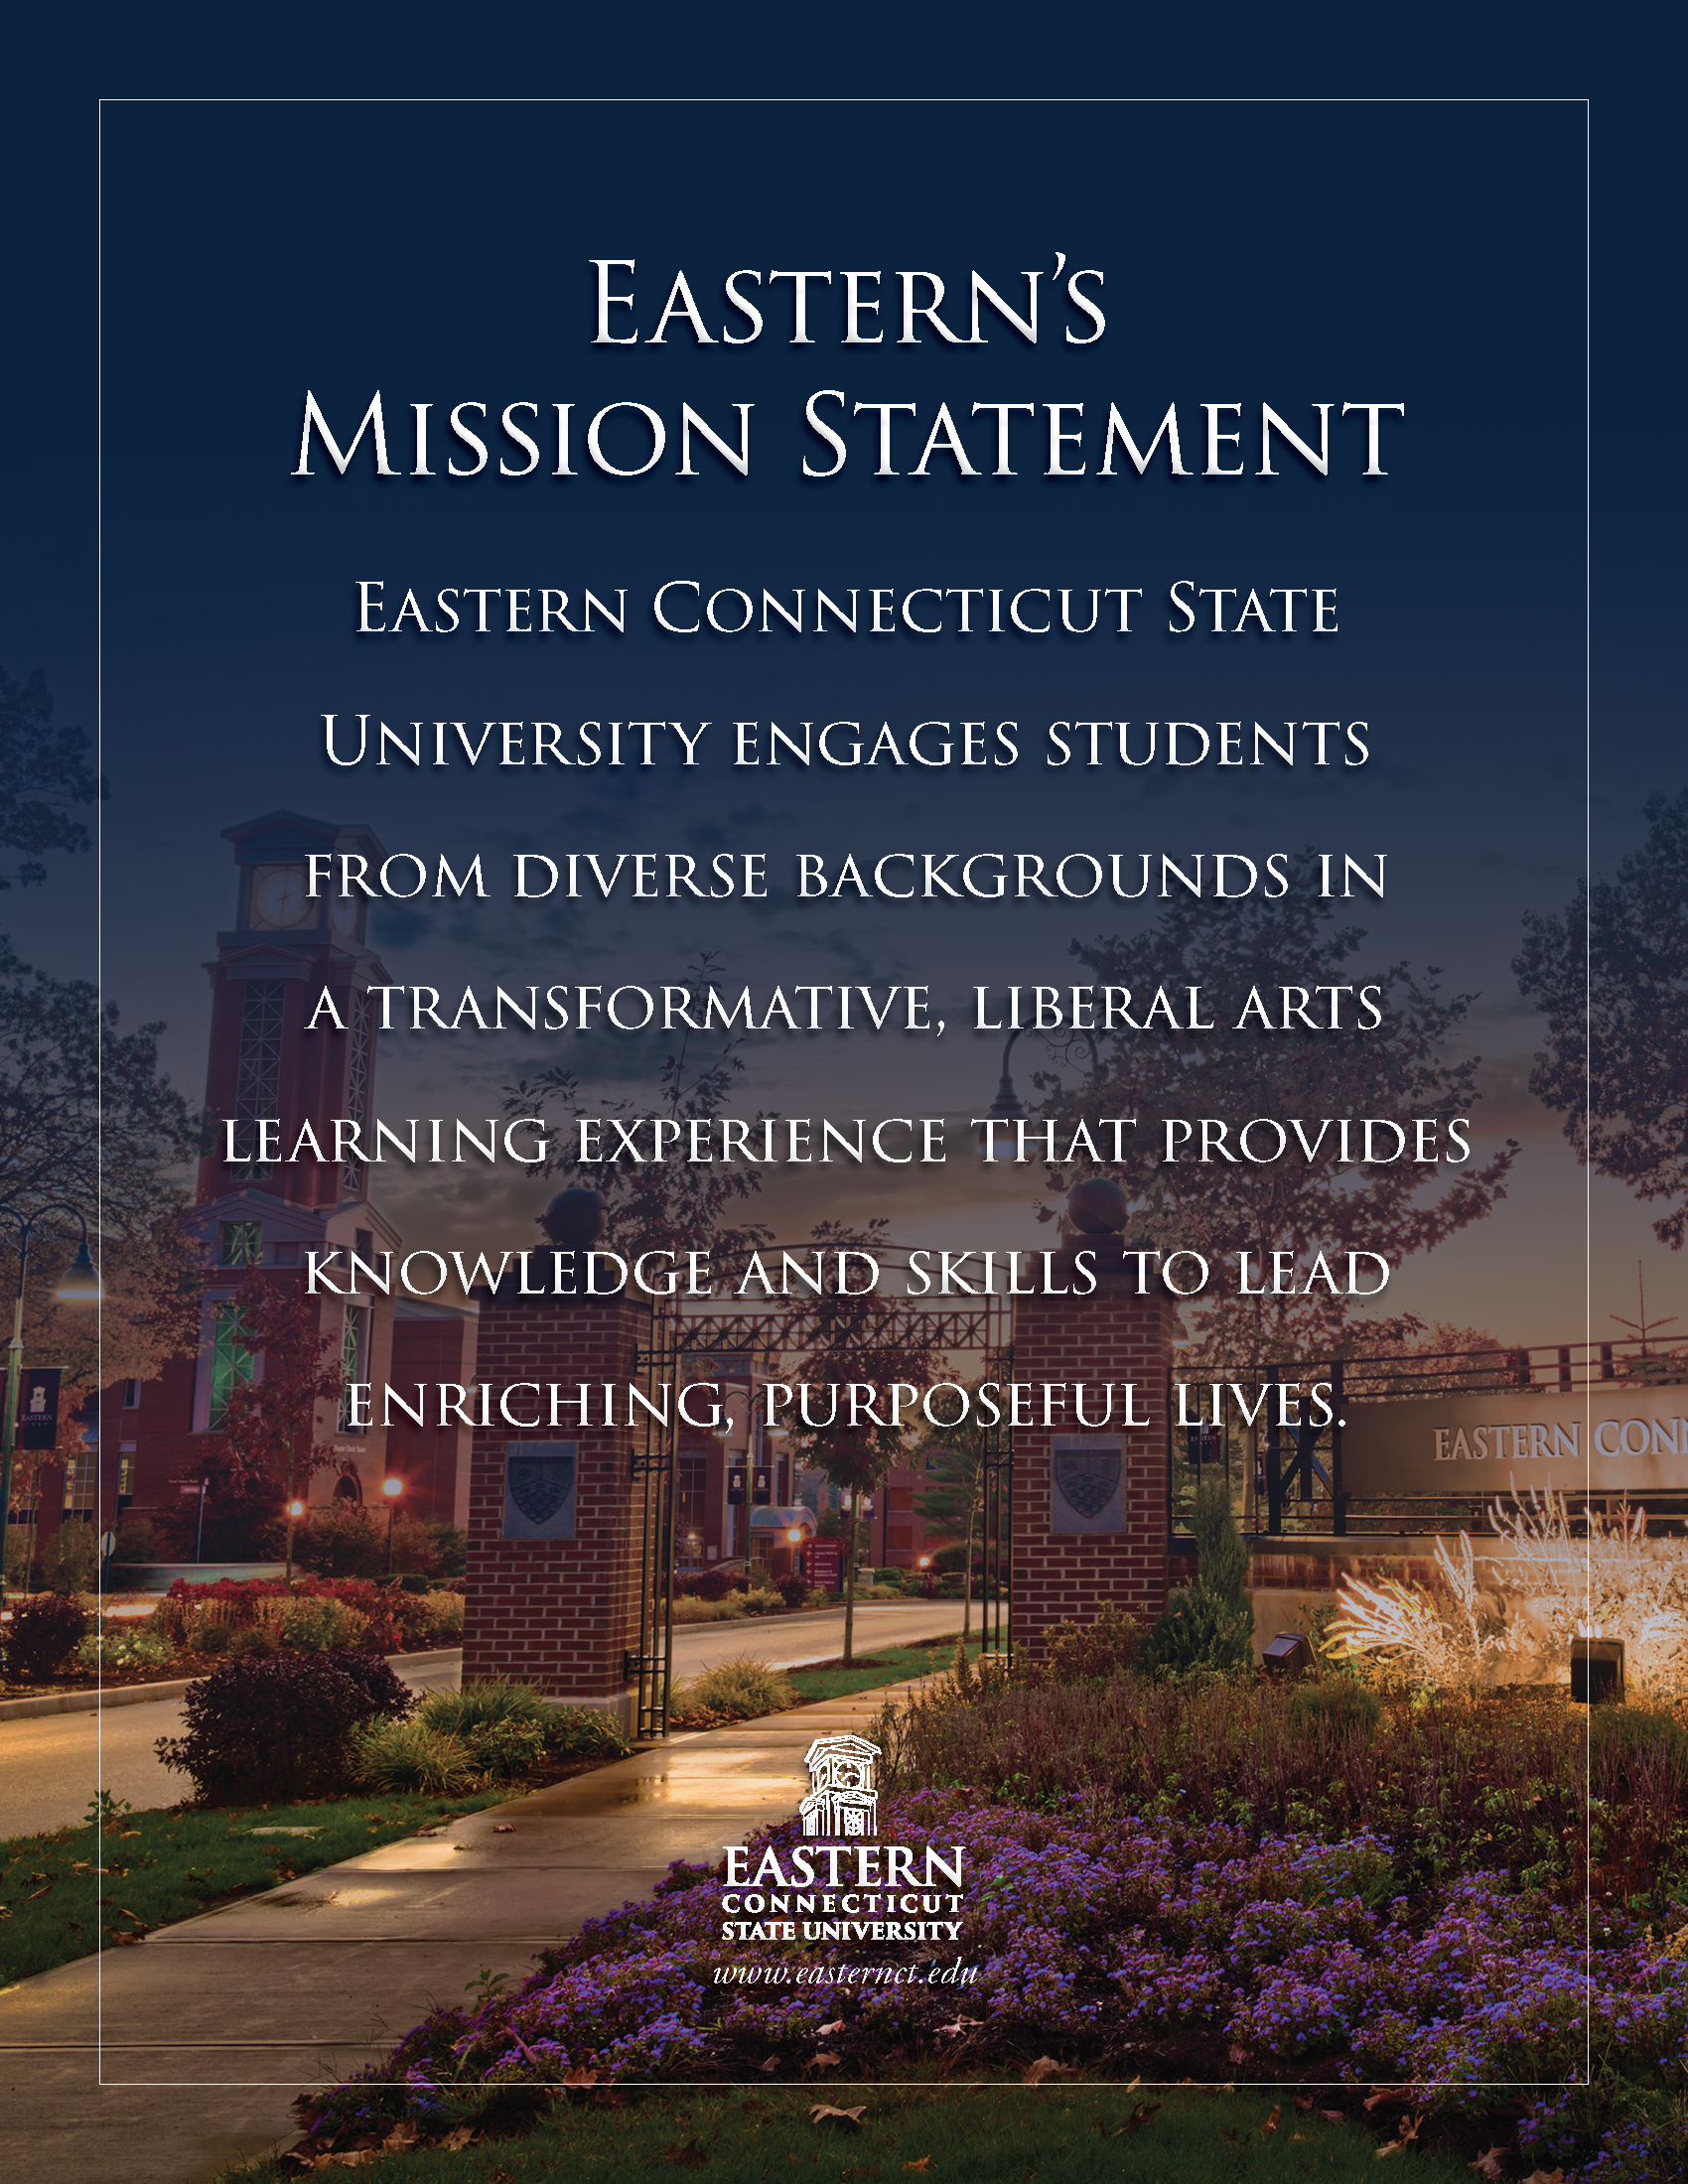 Eastern's Mission Statement - Eastern Connecticut State University engages students from diverse backgrounds in a transformative, liberal arts learning experience that provides knowledge and skills to lead enriching, purposeful lives.